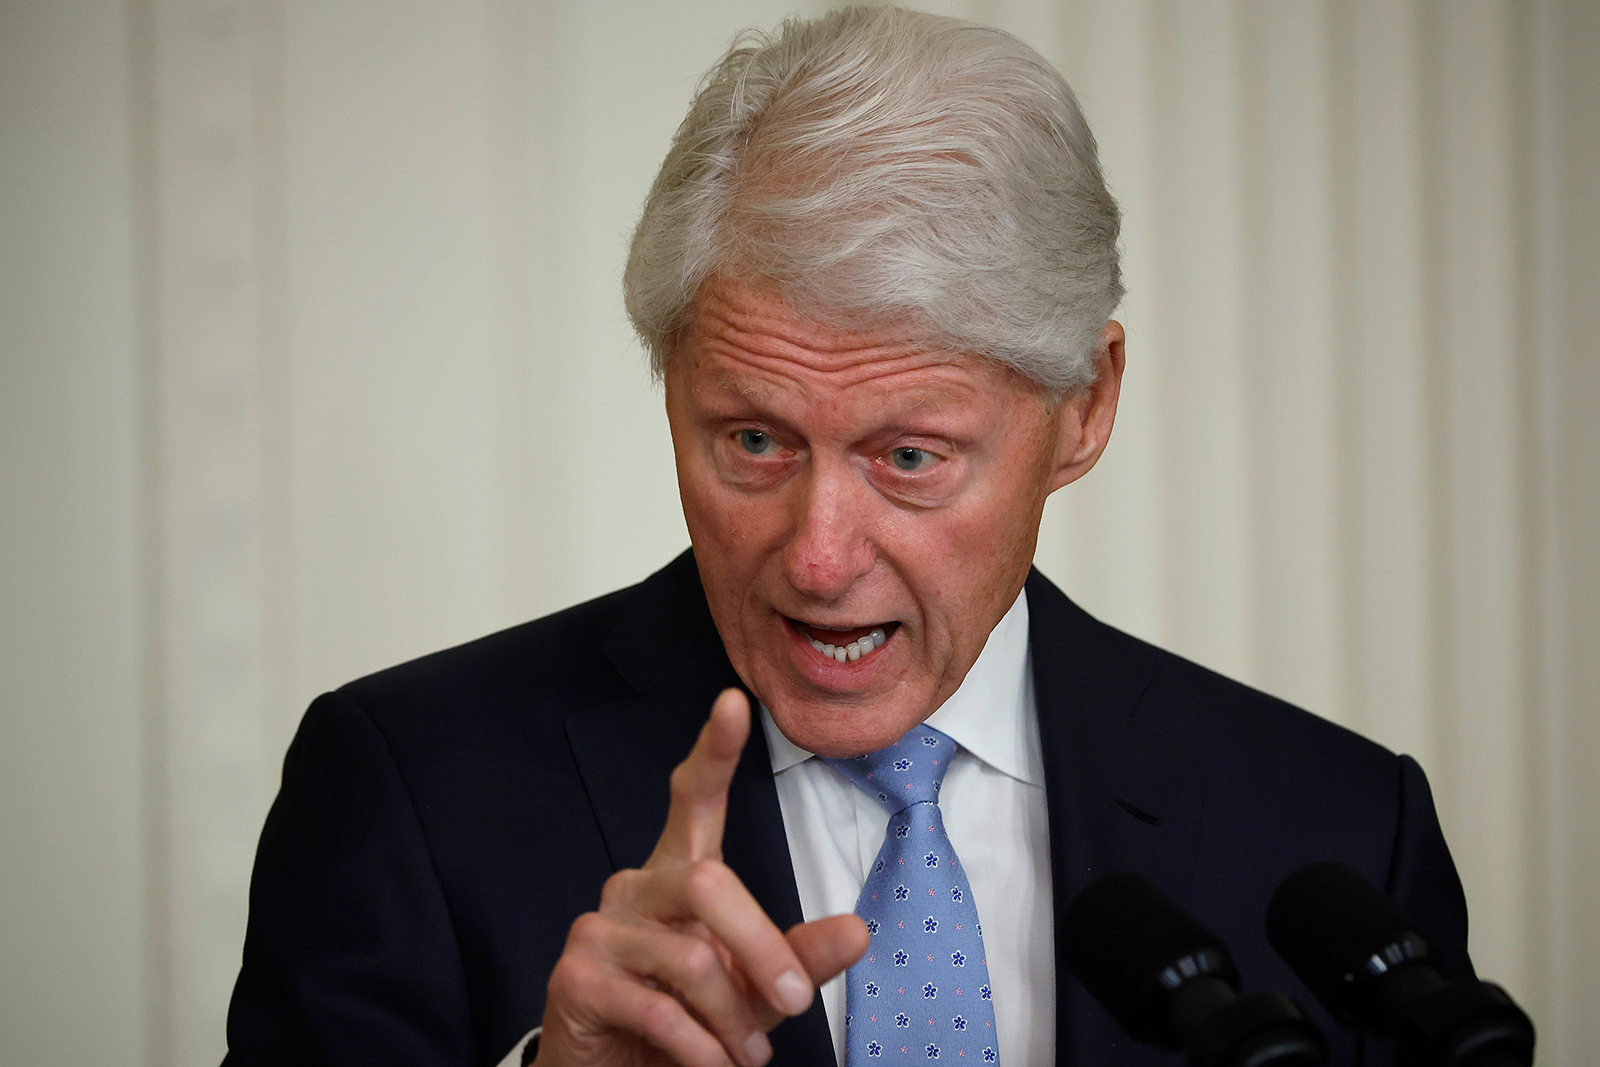 Bill Clinton delivers remarks during an event in Washington, on February 2.